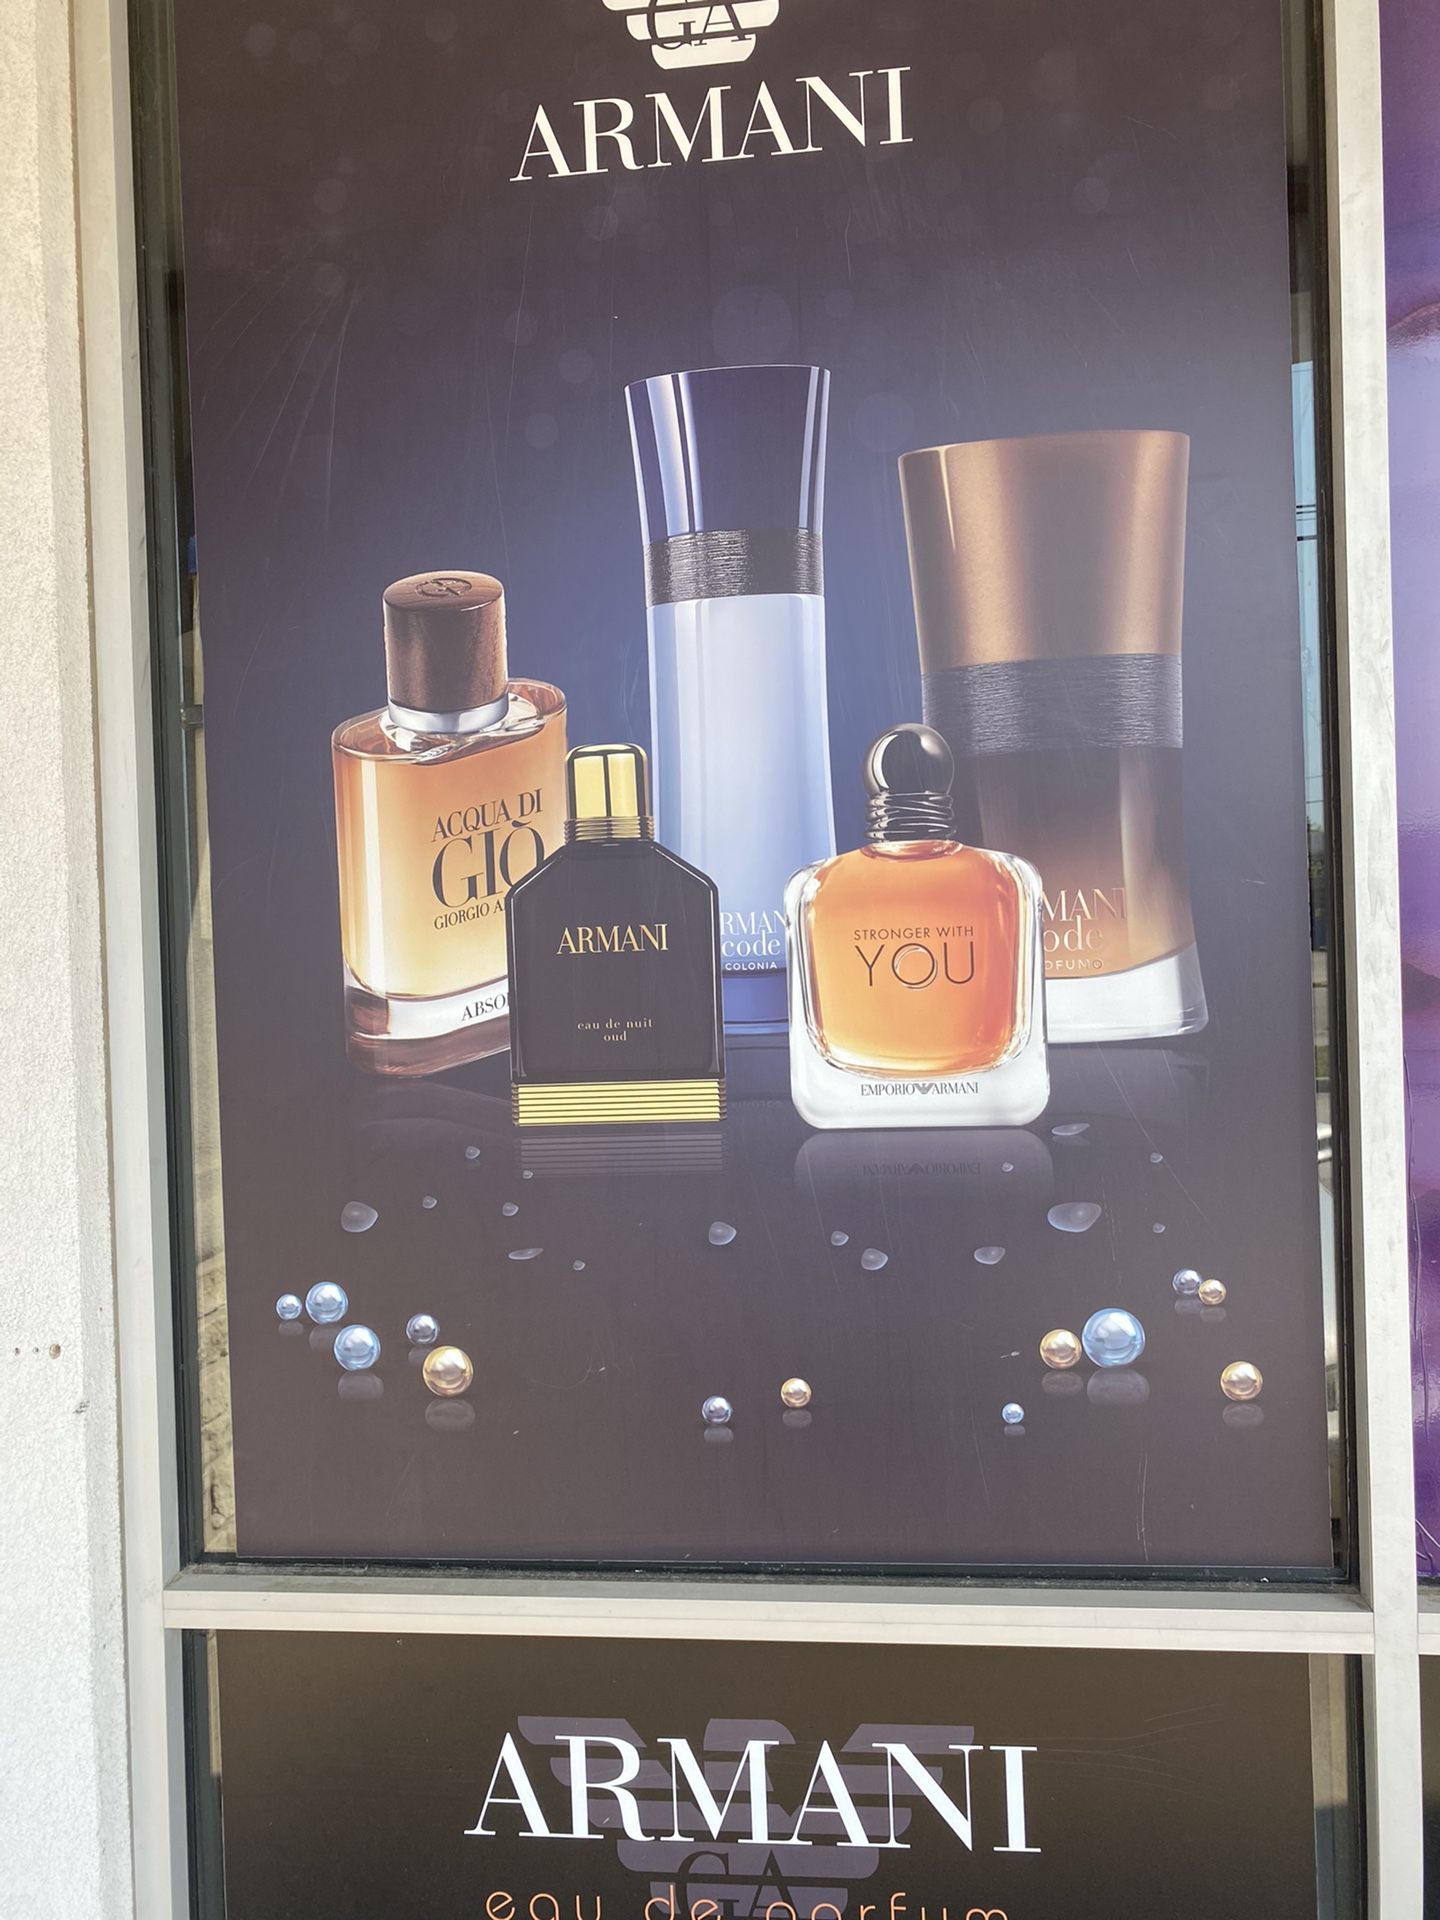 Huge outlet for name brand fragrances. 20% -50% retail. 11450 Harry Hines blvd Dallas tx